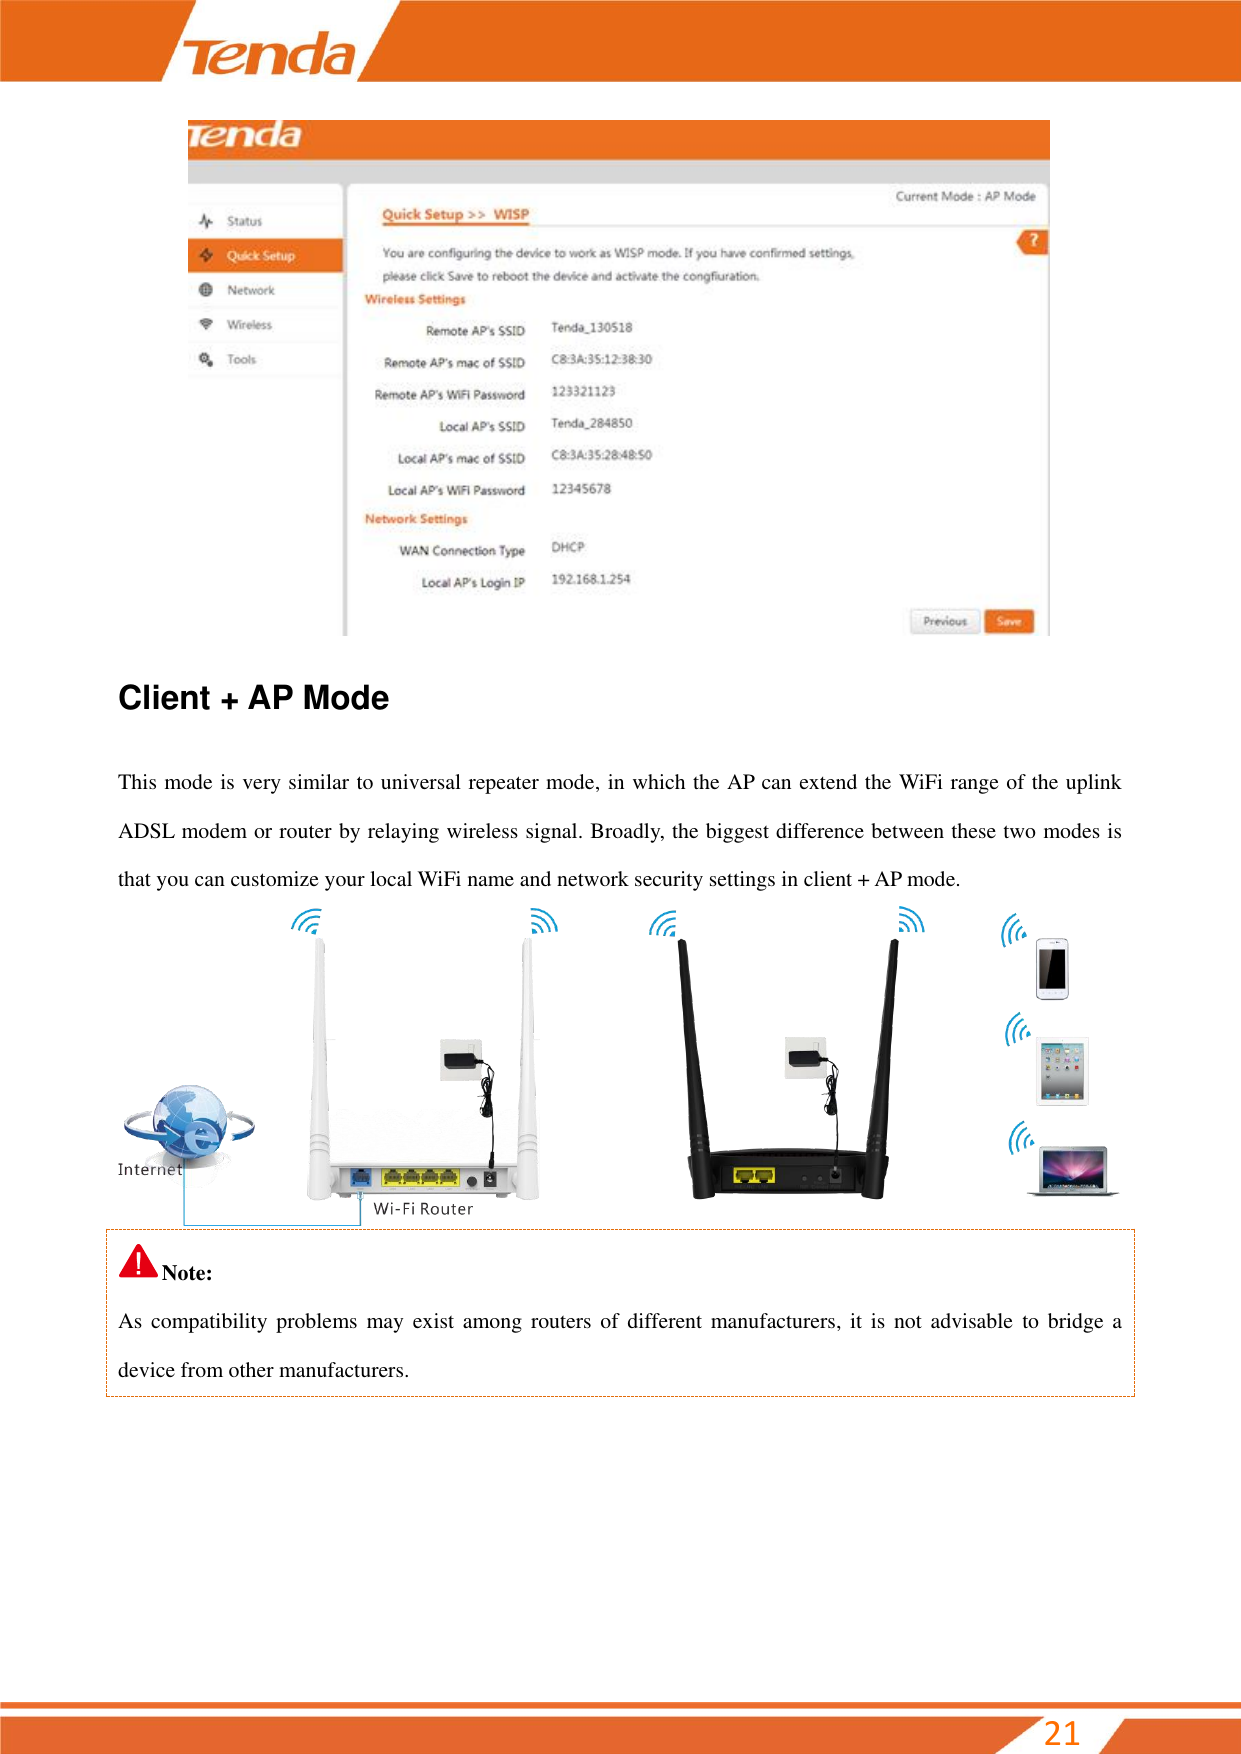         21  Client + AP Mode This mode is very similar to universal repeater mode, in which the AP can extend the WiFi range of the uplink ADSL modem or router by relaying wireless signal. Broadly, the biggest difference between these two modes is that you can customize your local WiFi name and network security settings in client + AP mode.    Note: As compatibility  problems may  exist among  routers  of different manufacturers,  it is  not advisable  to  bridge a device from other manufacturers.     